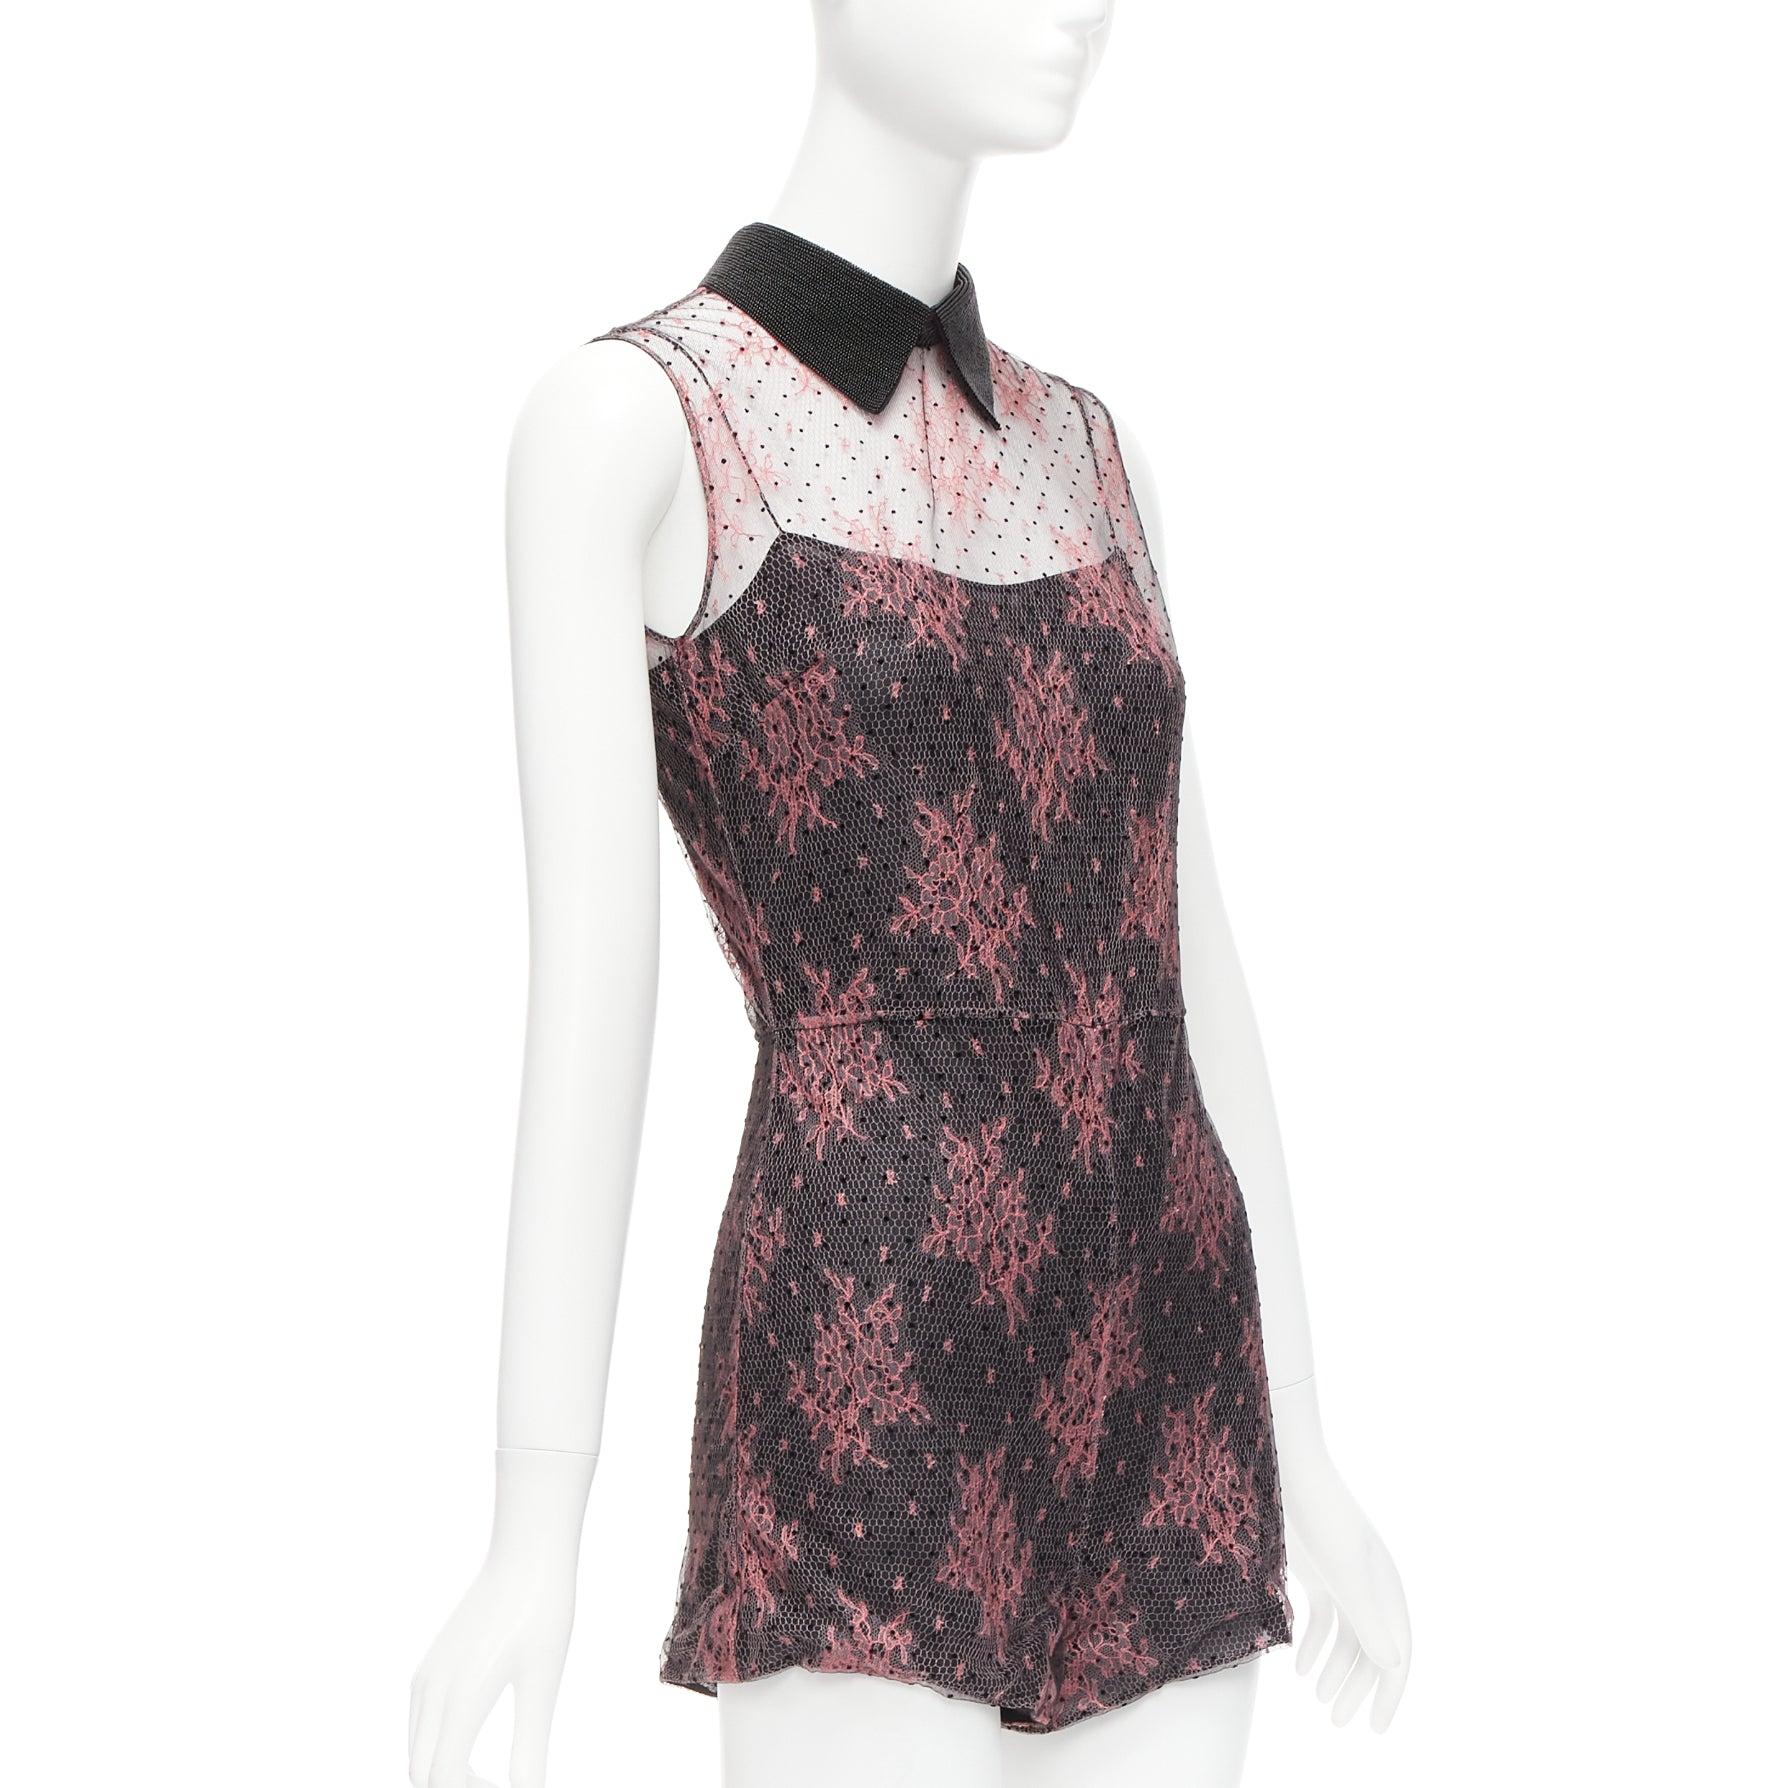 CHRISTIAN DIOR black pink intricate lace overlay playsuit romper FR34 XS
Reference: AAWC/A00692
Brand: Dior
Designer: Maria Grazia Chiuri
Material: Modal, Blend
Color: Pink, Black
Pattern: Lace
Closure: Zip
Lining: Black Fabric
Extra Details: Back